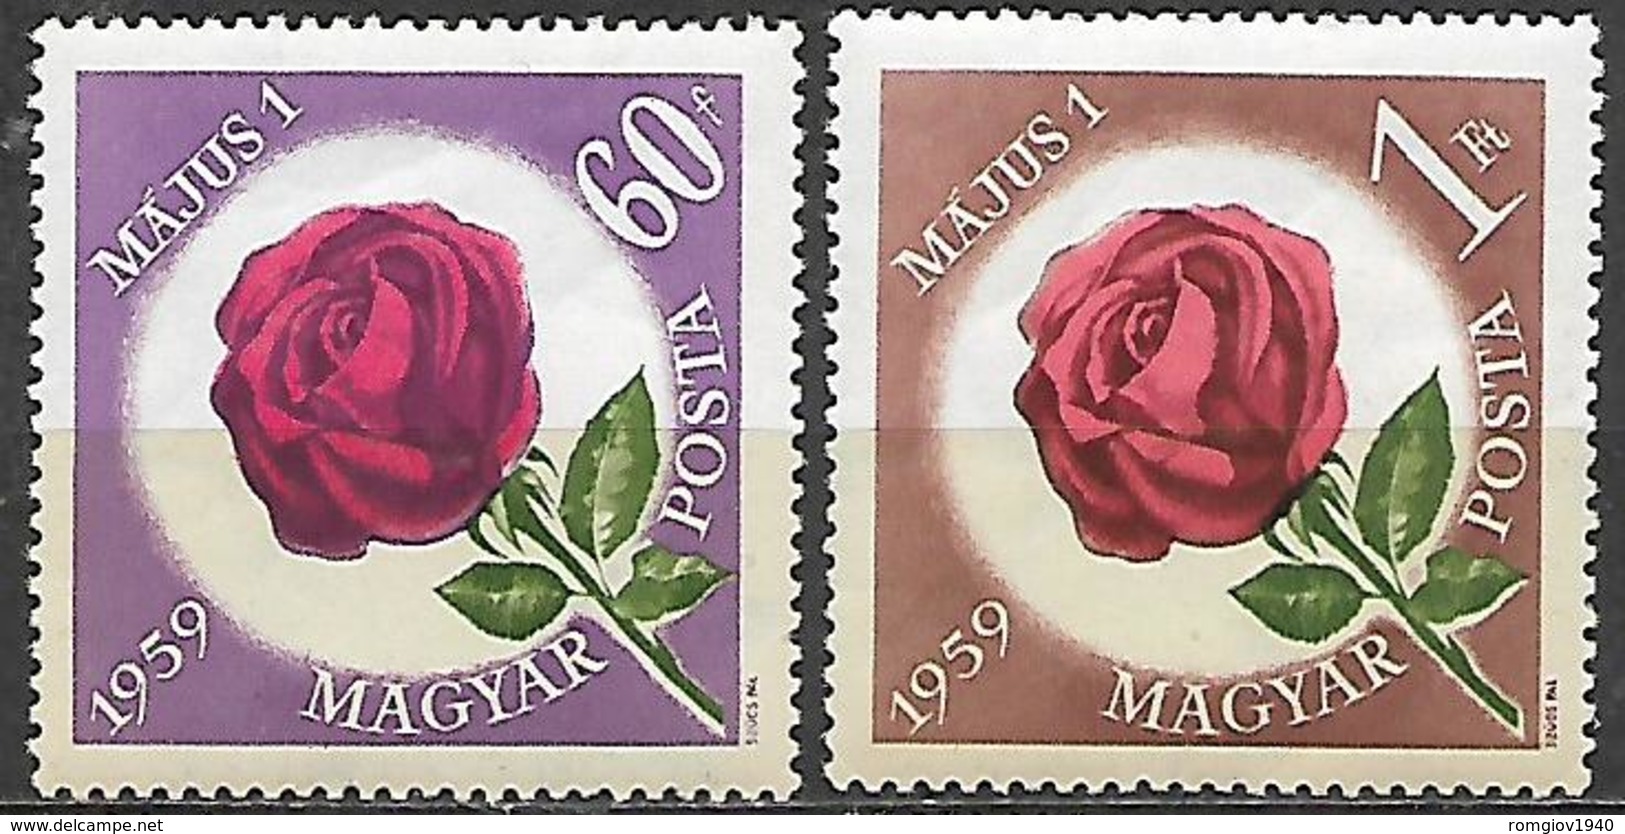 UNGHERIA 1959 PRIMO MAGGIO YVERT. 1276-1277 MNH XF - Used Stamps